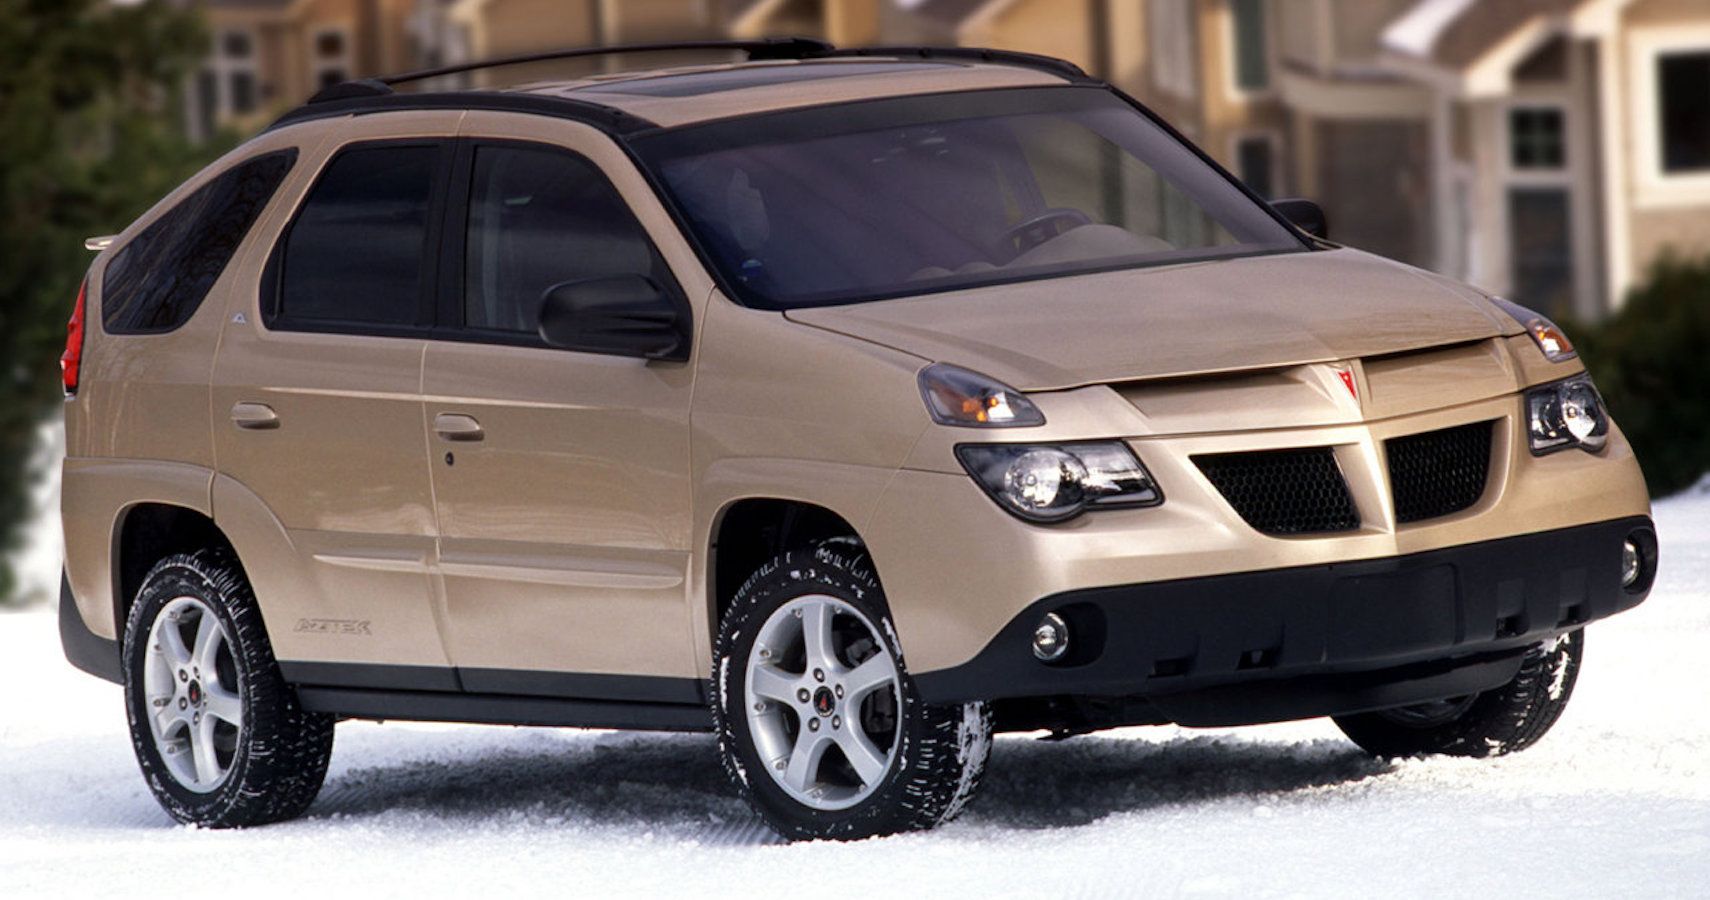 Why The Pontiac Aztek Was One Of The Worst American Cars Ever Made